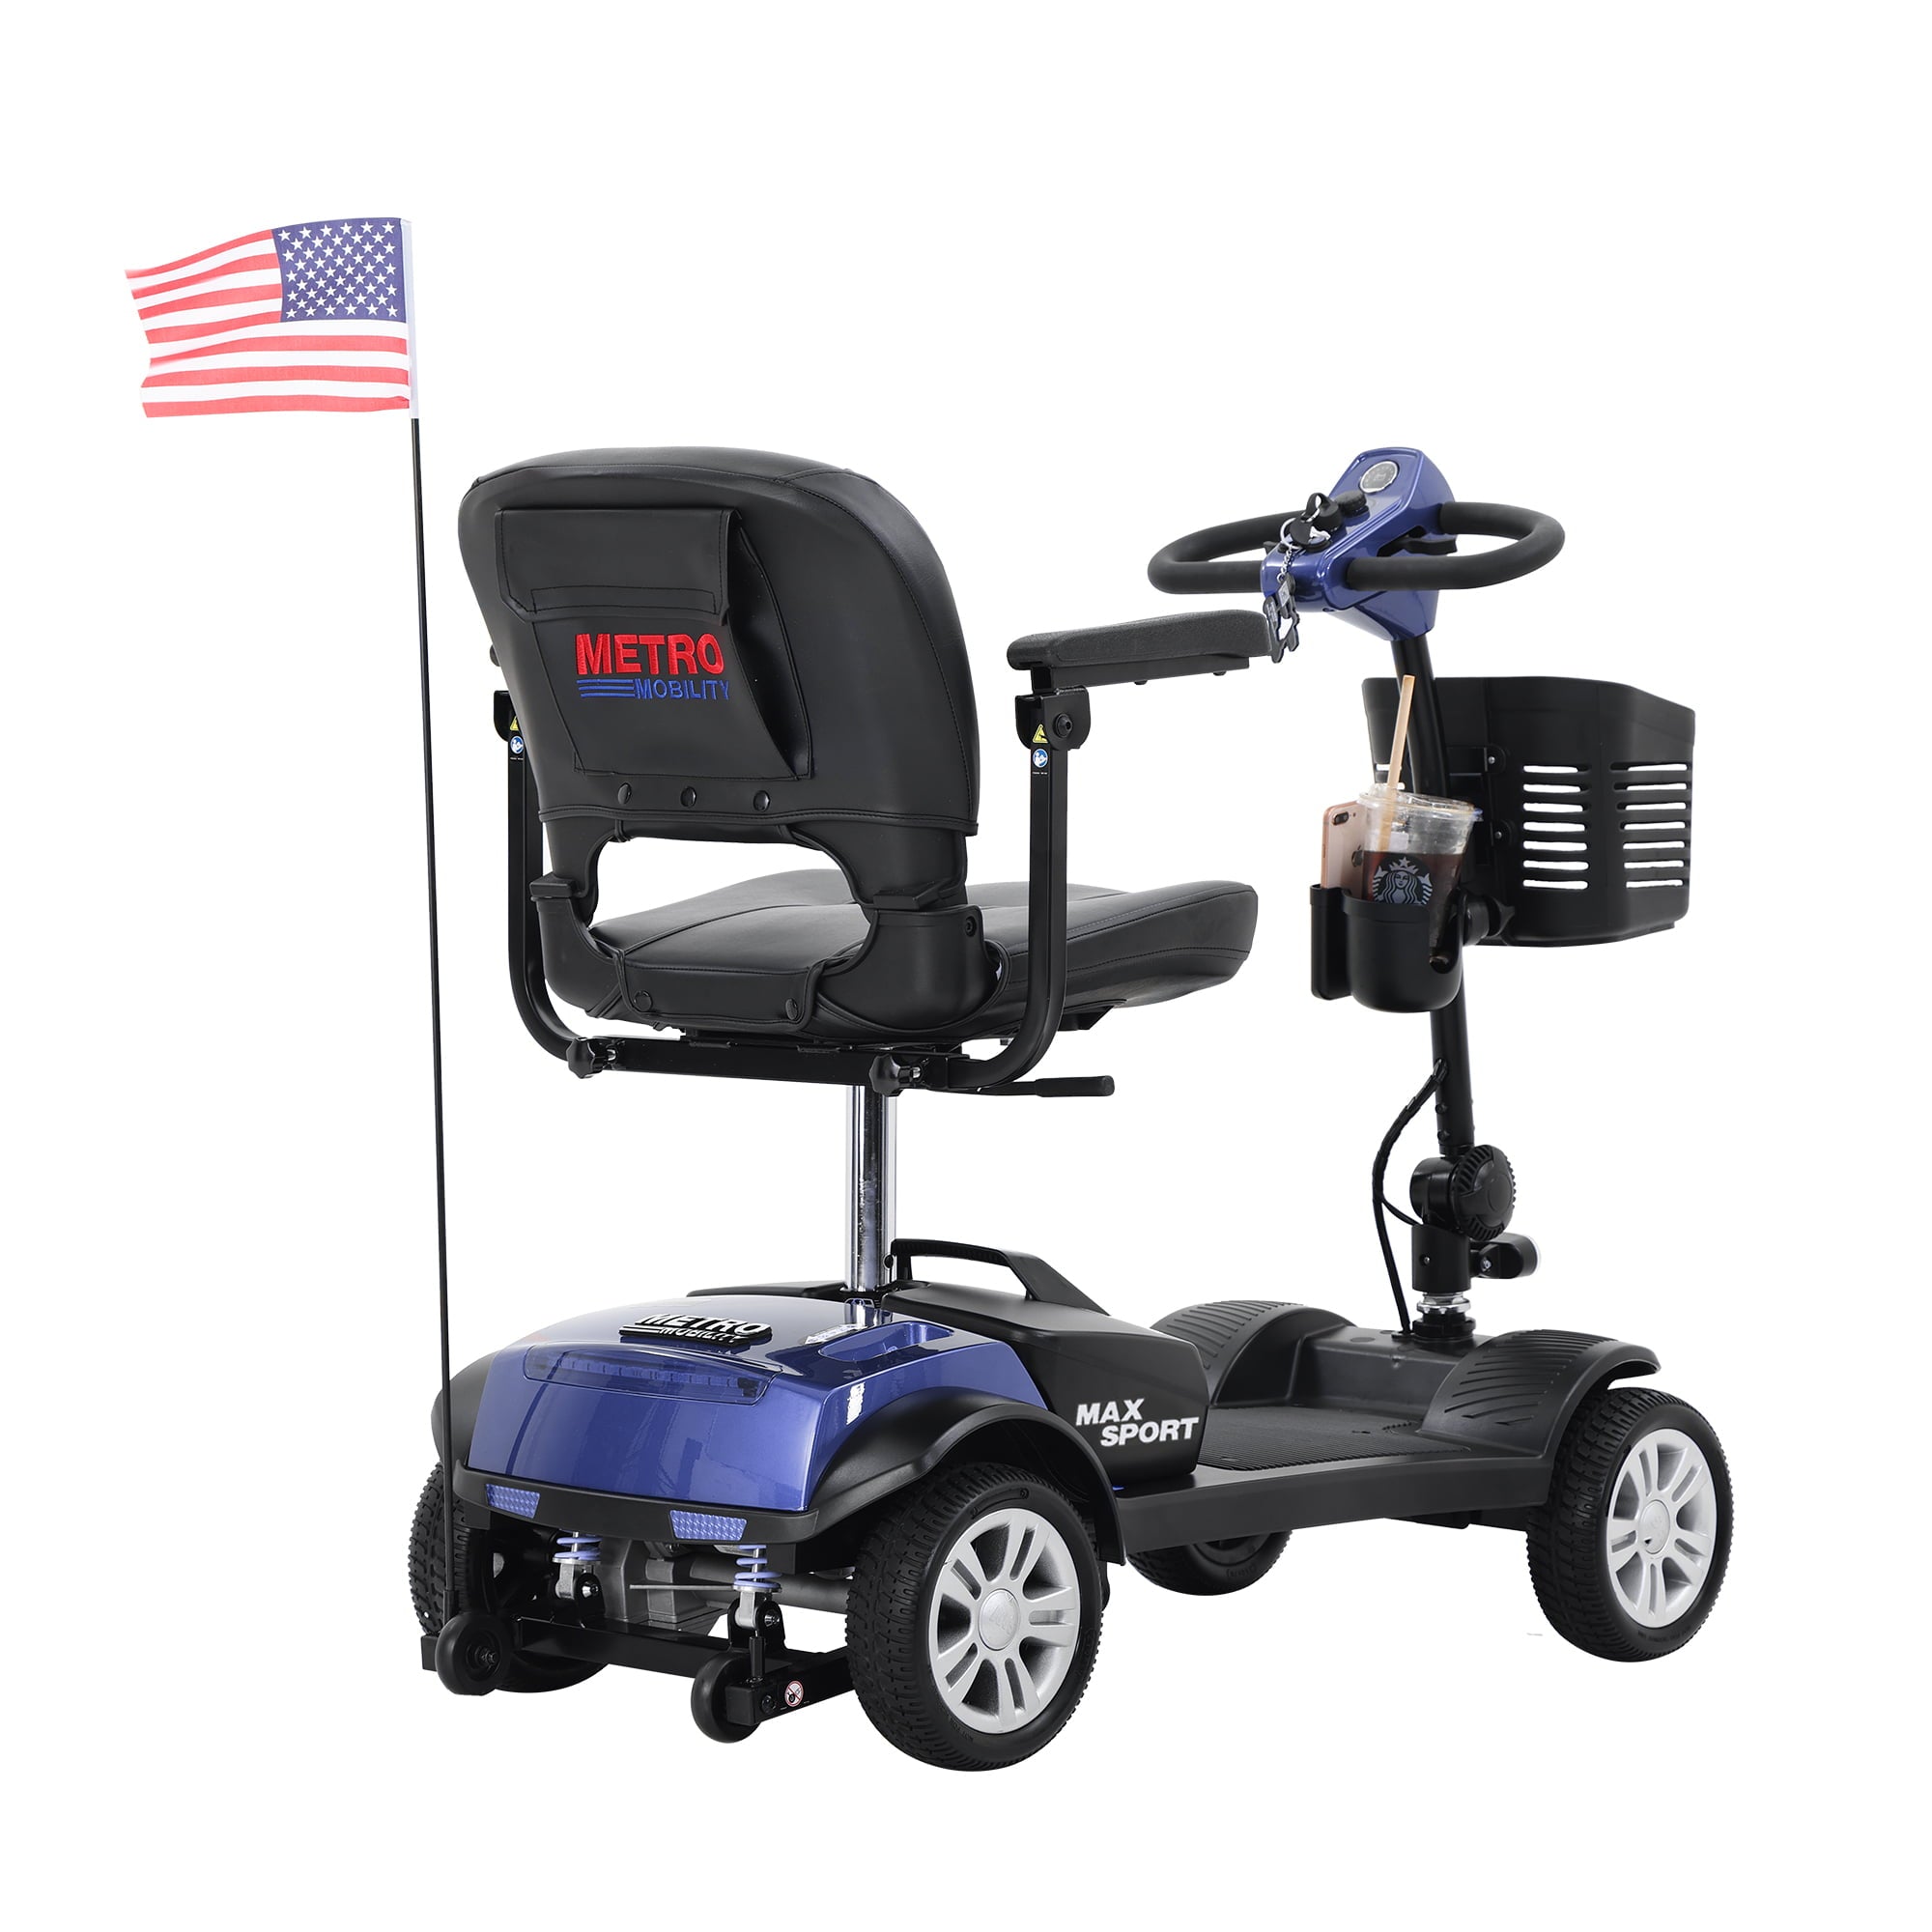 Tomshoo SPORT BLUE 4 Wheels Outdoor Compact Mobility Scooter with 2 in 1 Cup & Phone Holder